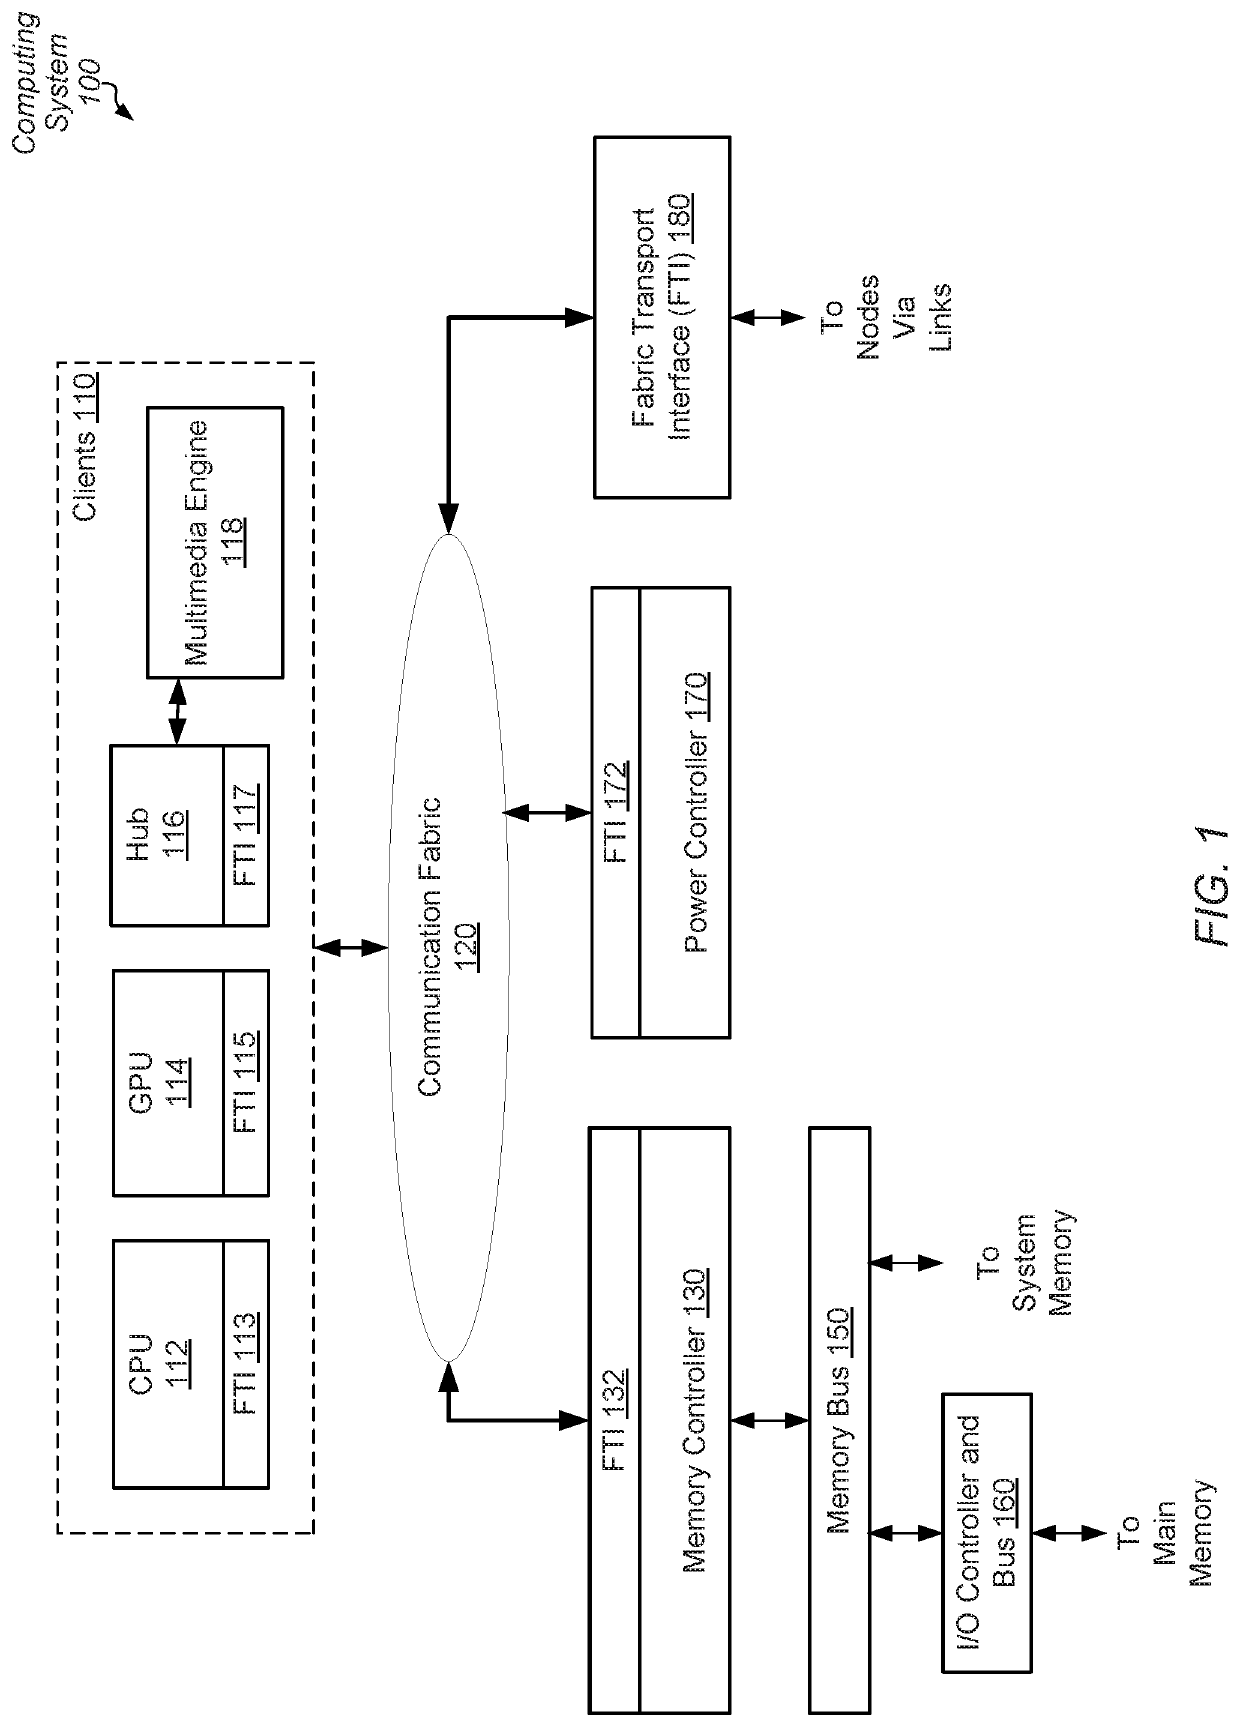 Method for maintaining cache consistency during reordering